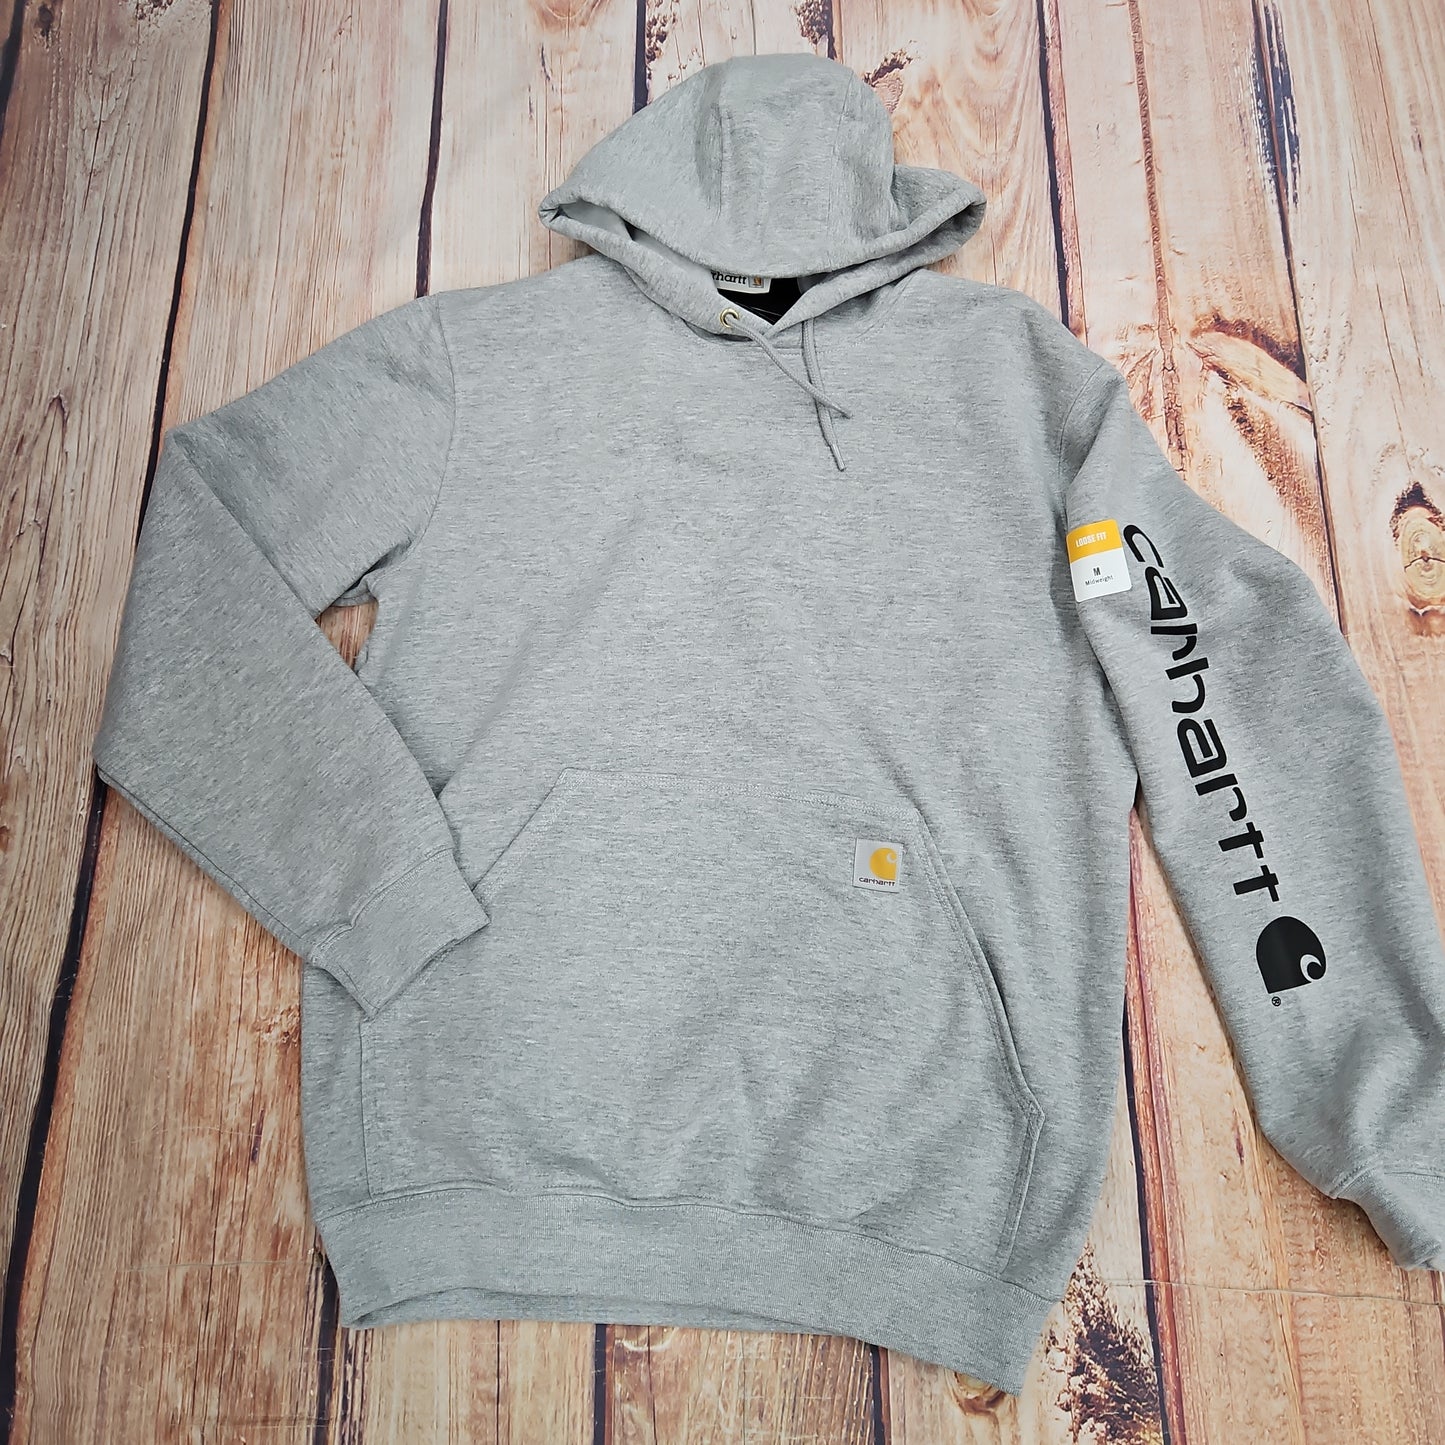 CARHARTT K288 MIDWEIGHT HOODED PULLOVER-E20 HEATHER GRAY